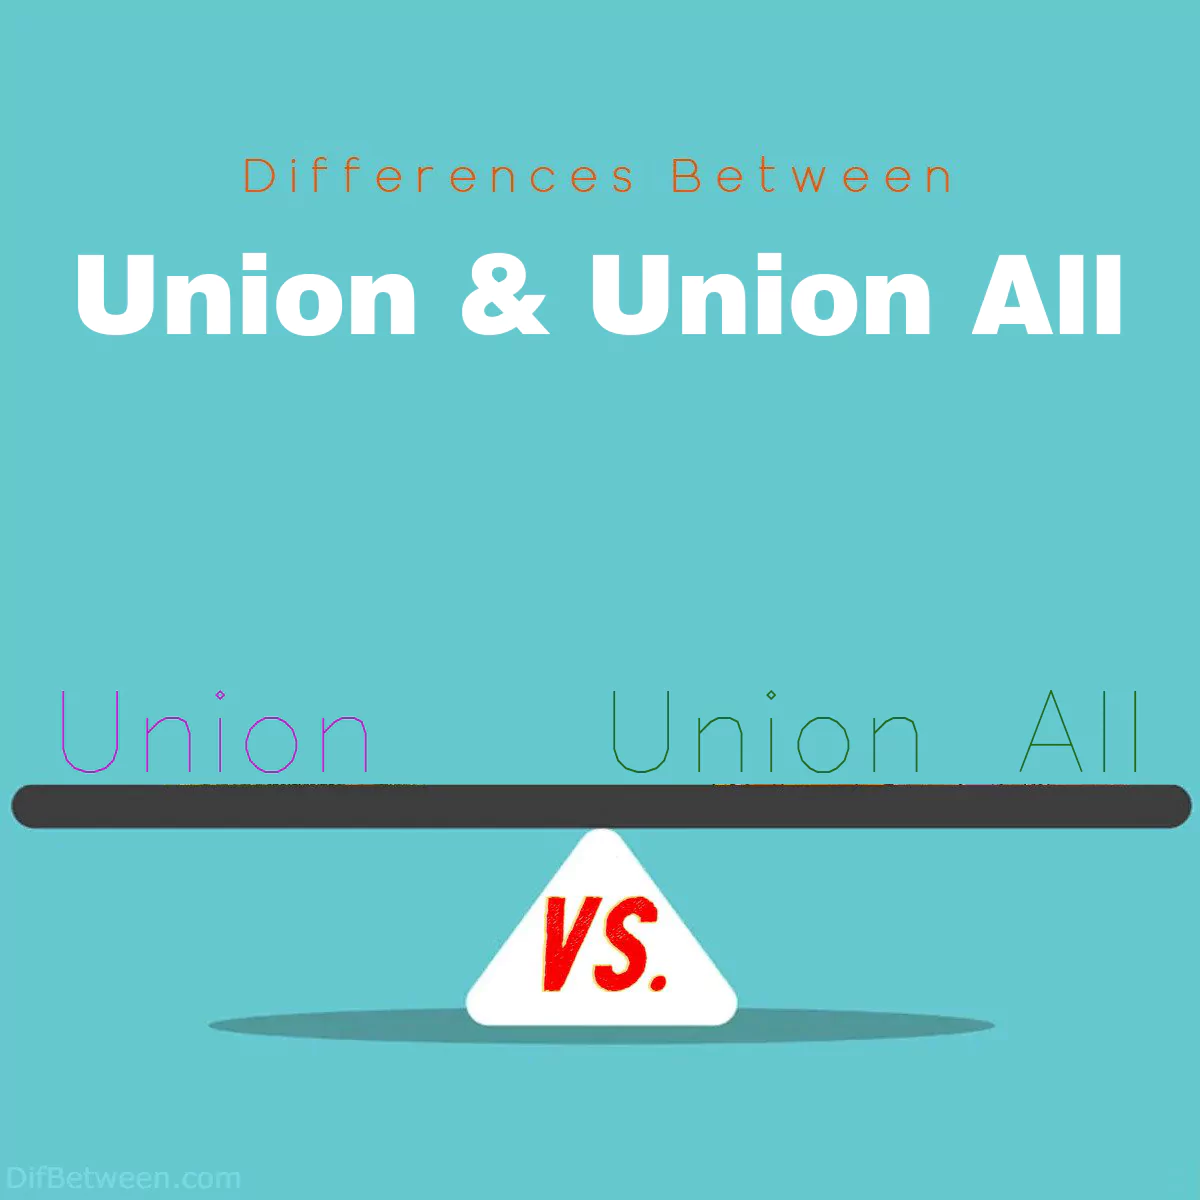 Differences Between Union and Union All